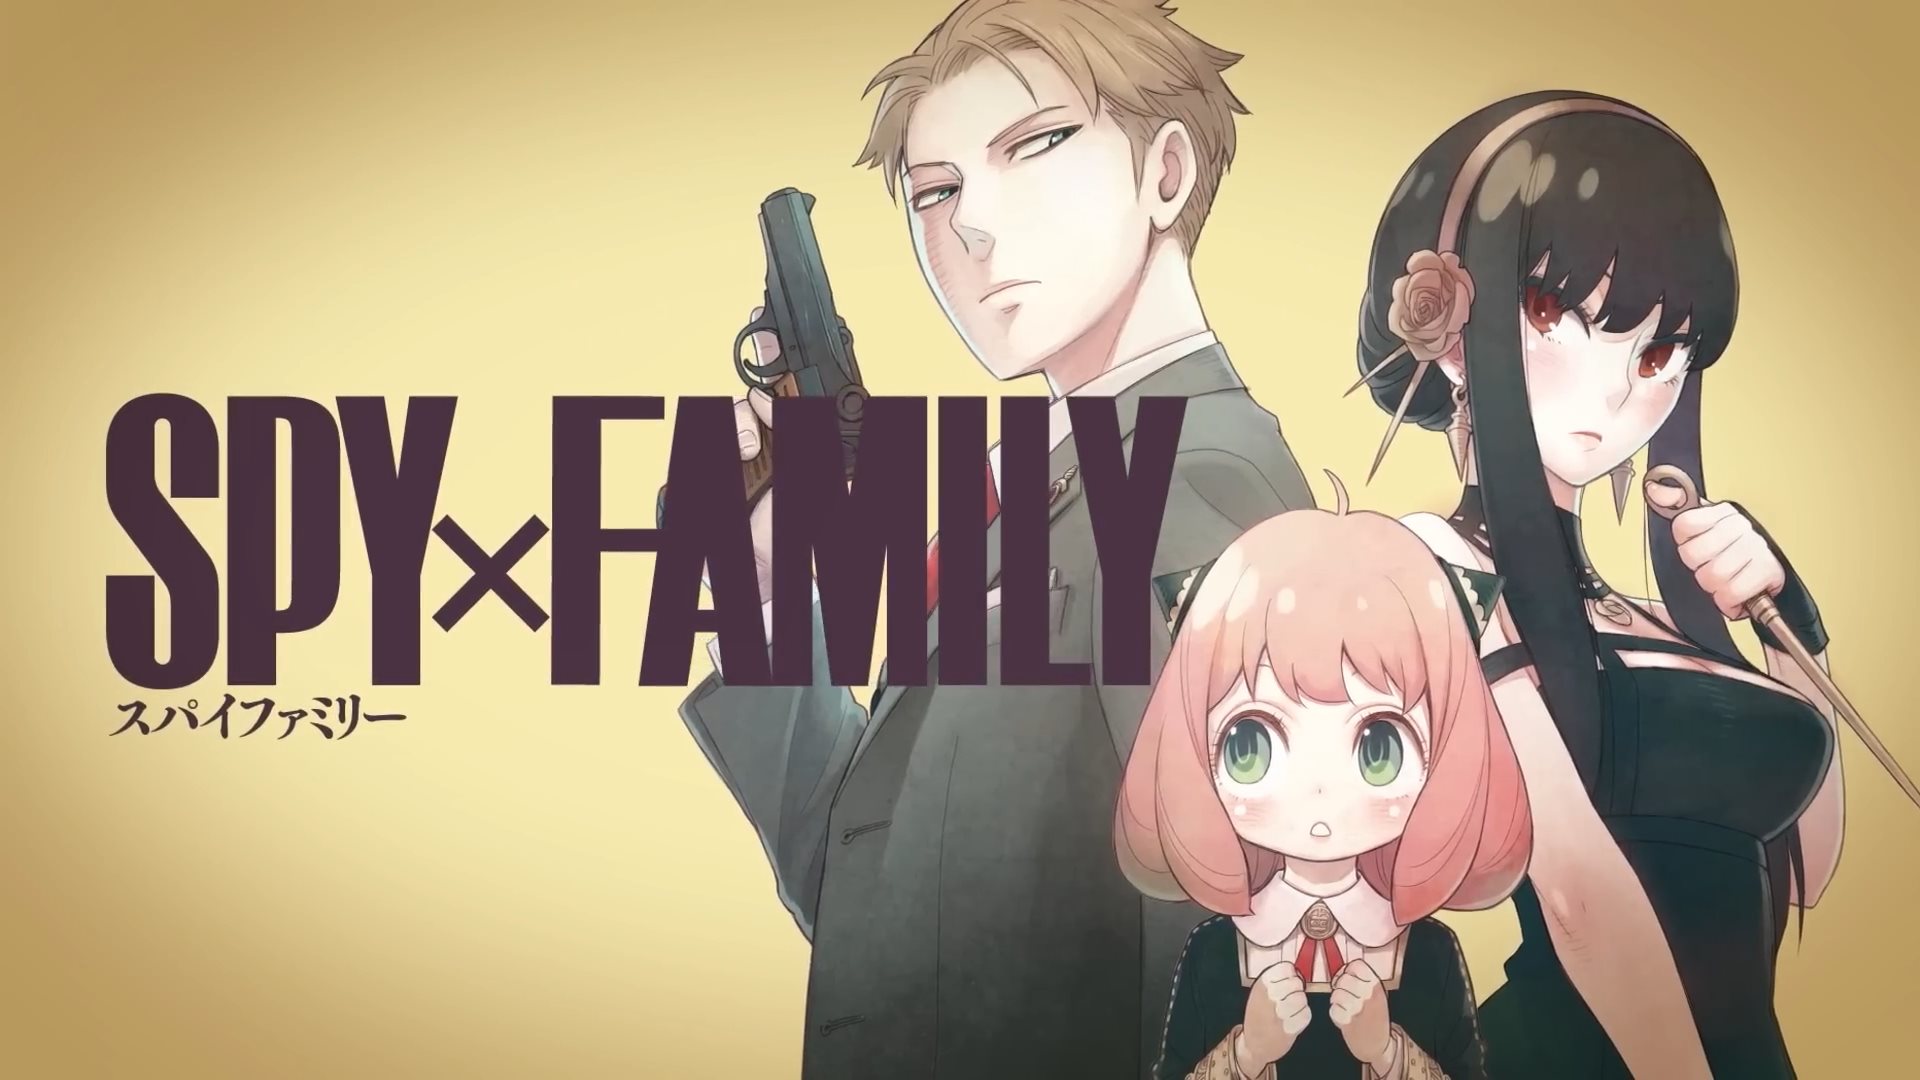 Anime Trending - 【BREAKING】 SPY x FAMILY CODE: White - New Anime Teaser  Trailer! The film is scheduled for December 22 in Japan. Here are the  details so far: atani.me/sxfcodewhite | Facebook